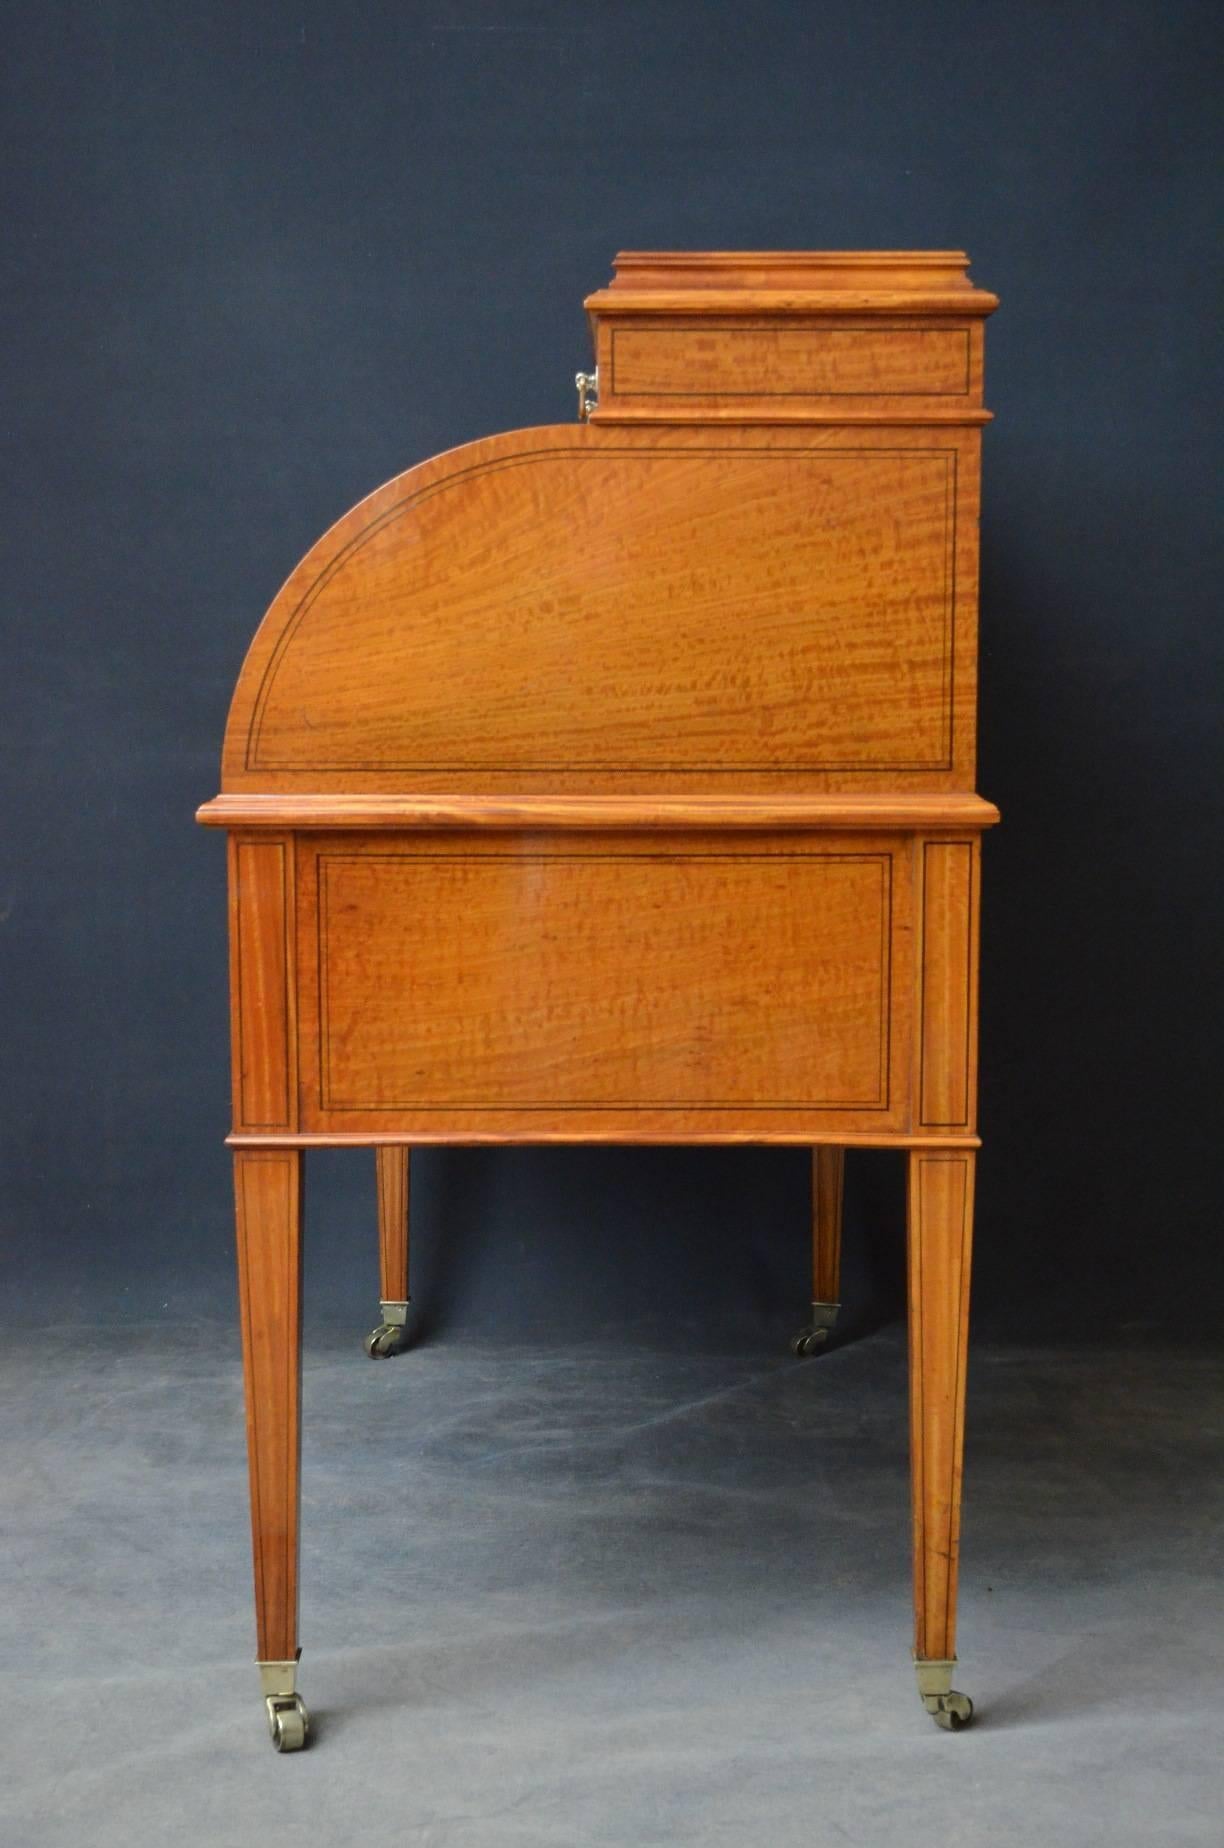 Late 19th Century Exhibition Quality Satinwood Cylinder Desk, Maples & Co